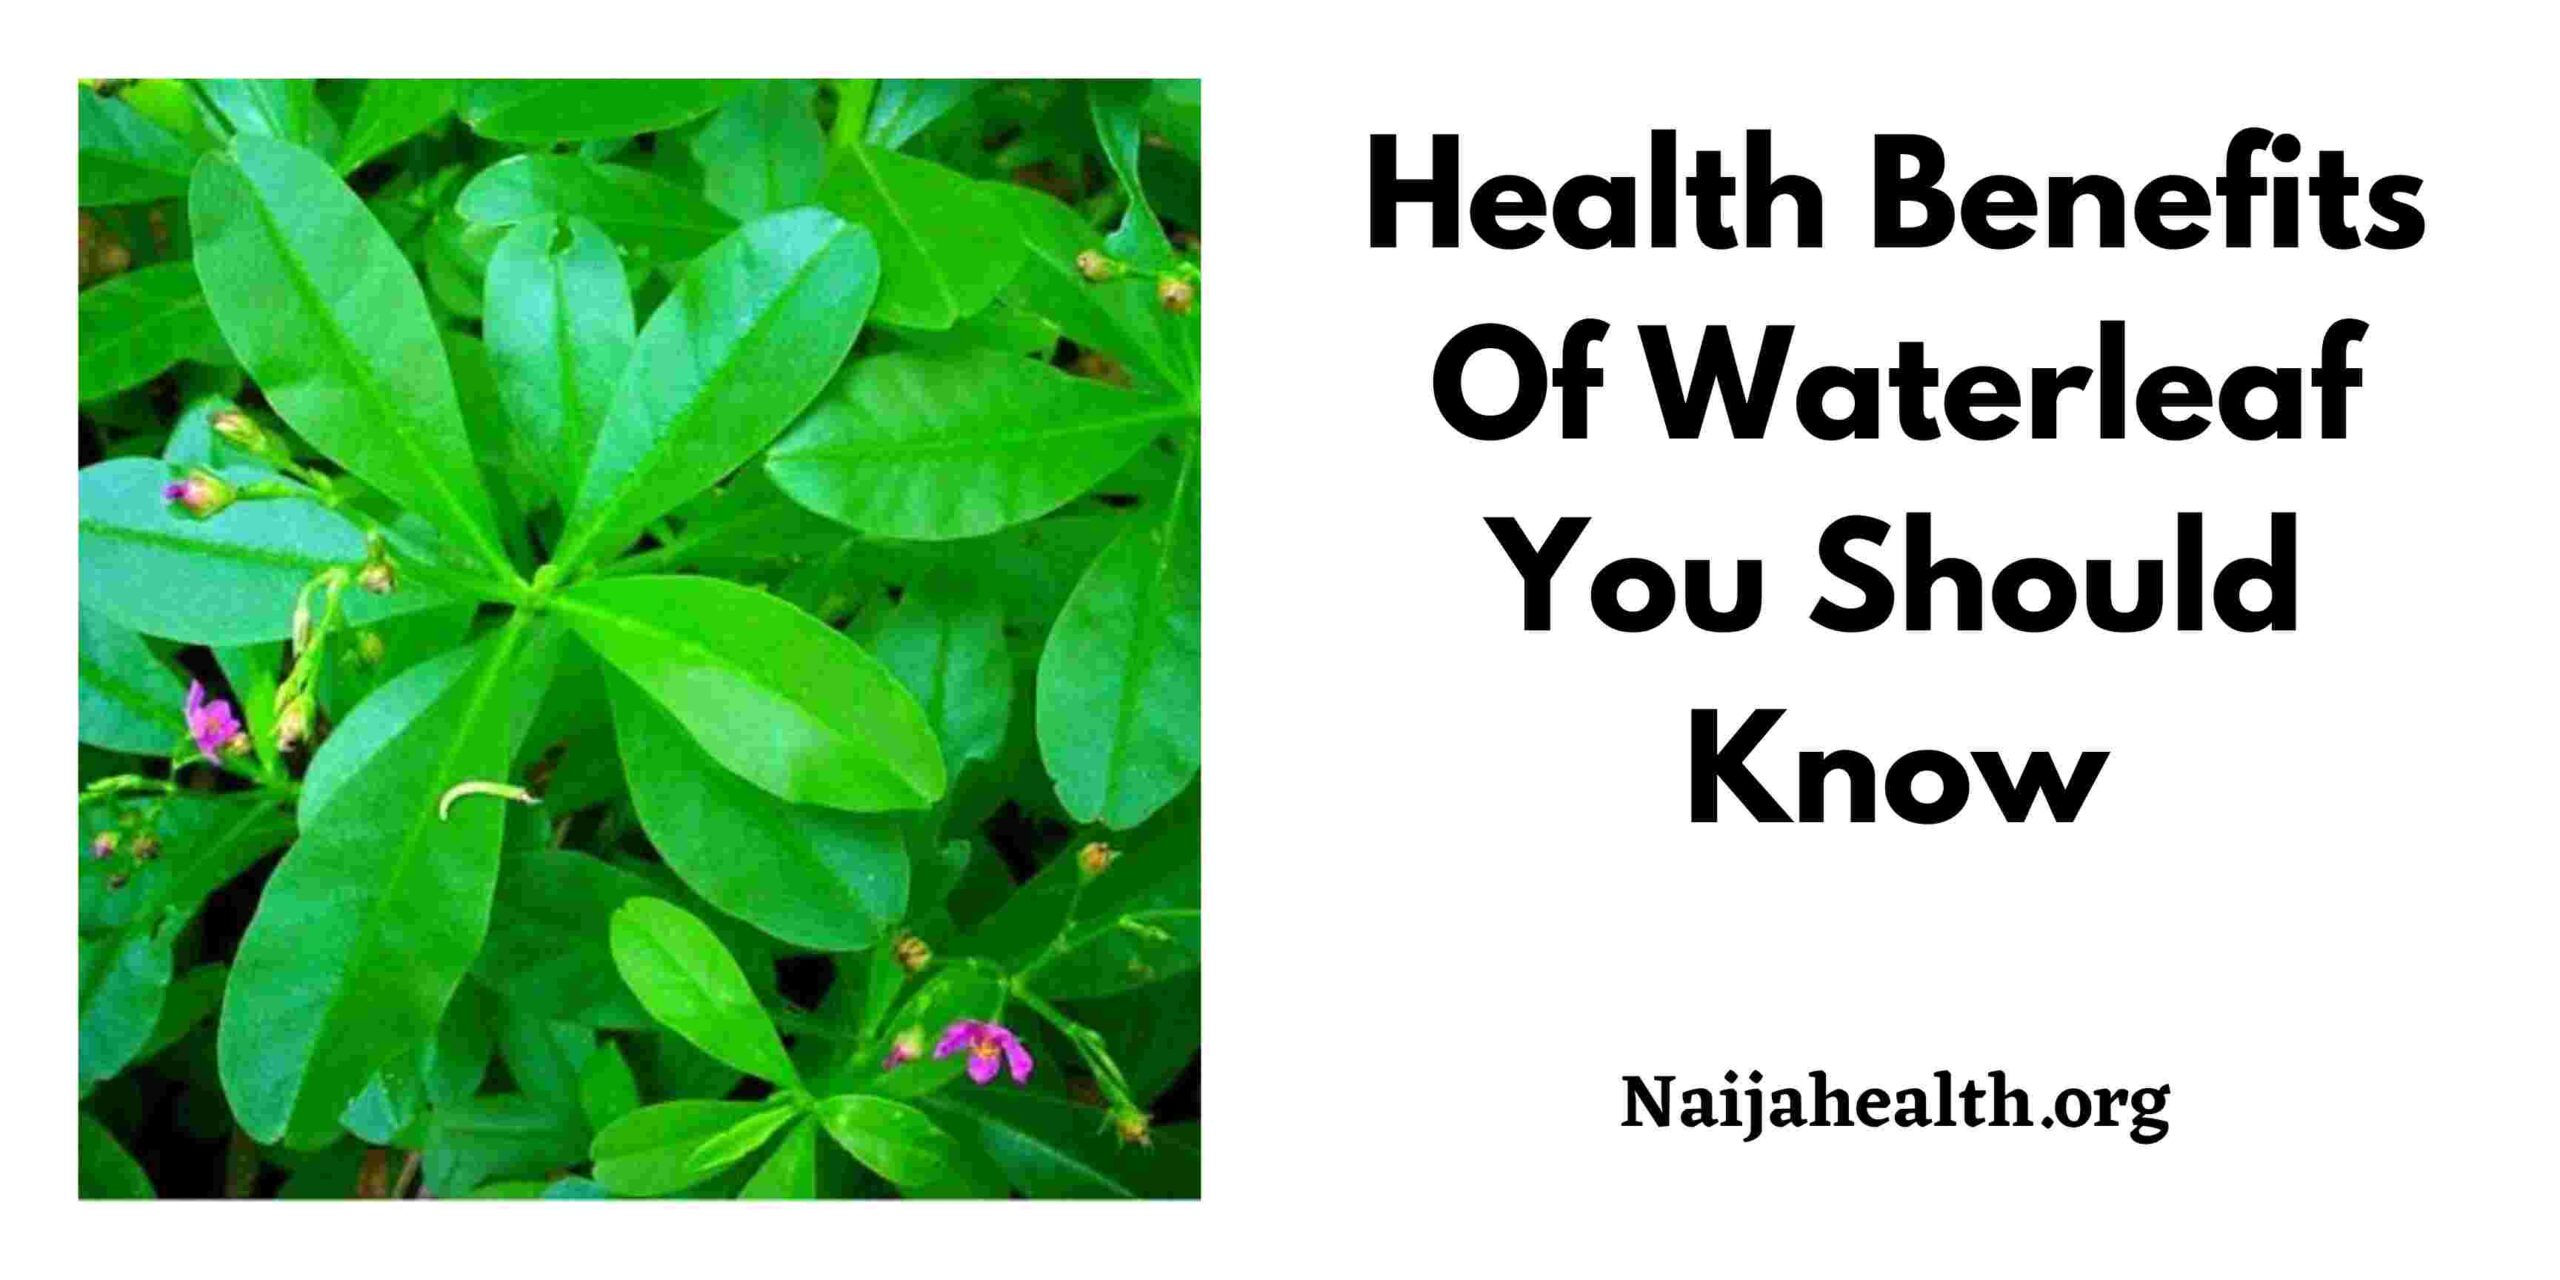 4 Health Benefits Of Waterleaf You Should Know